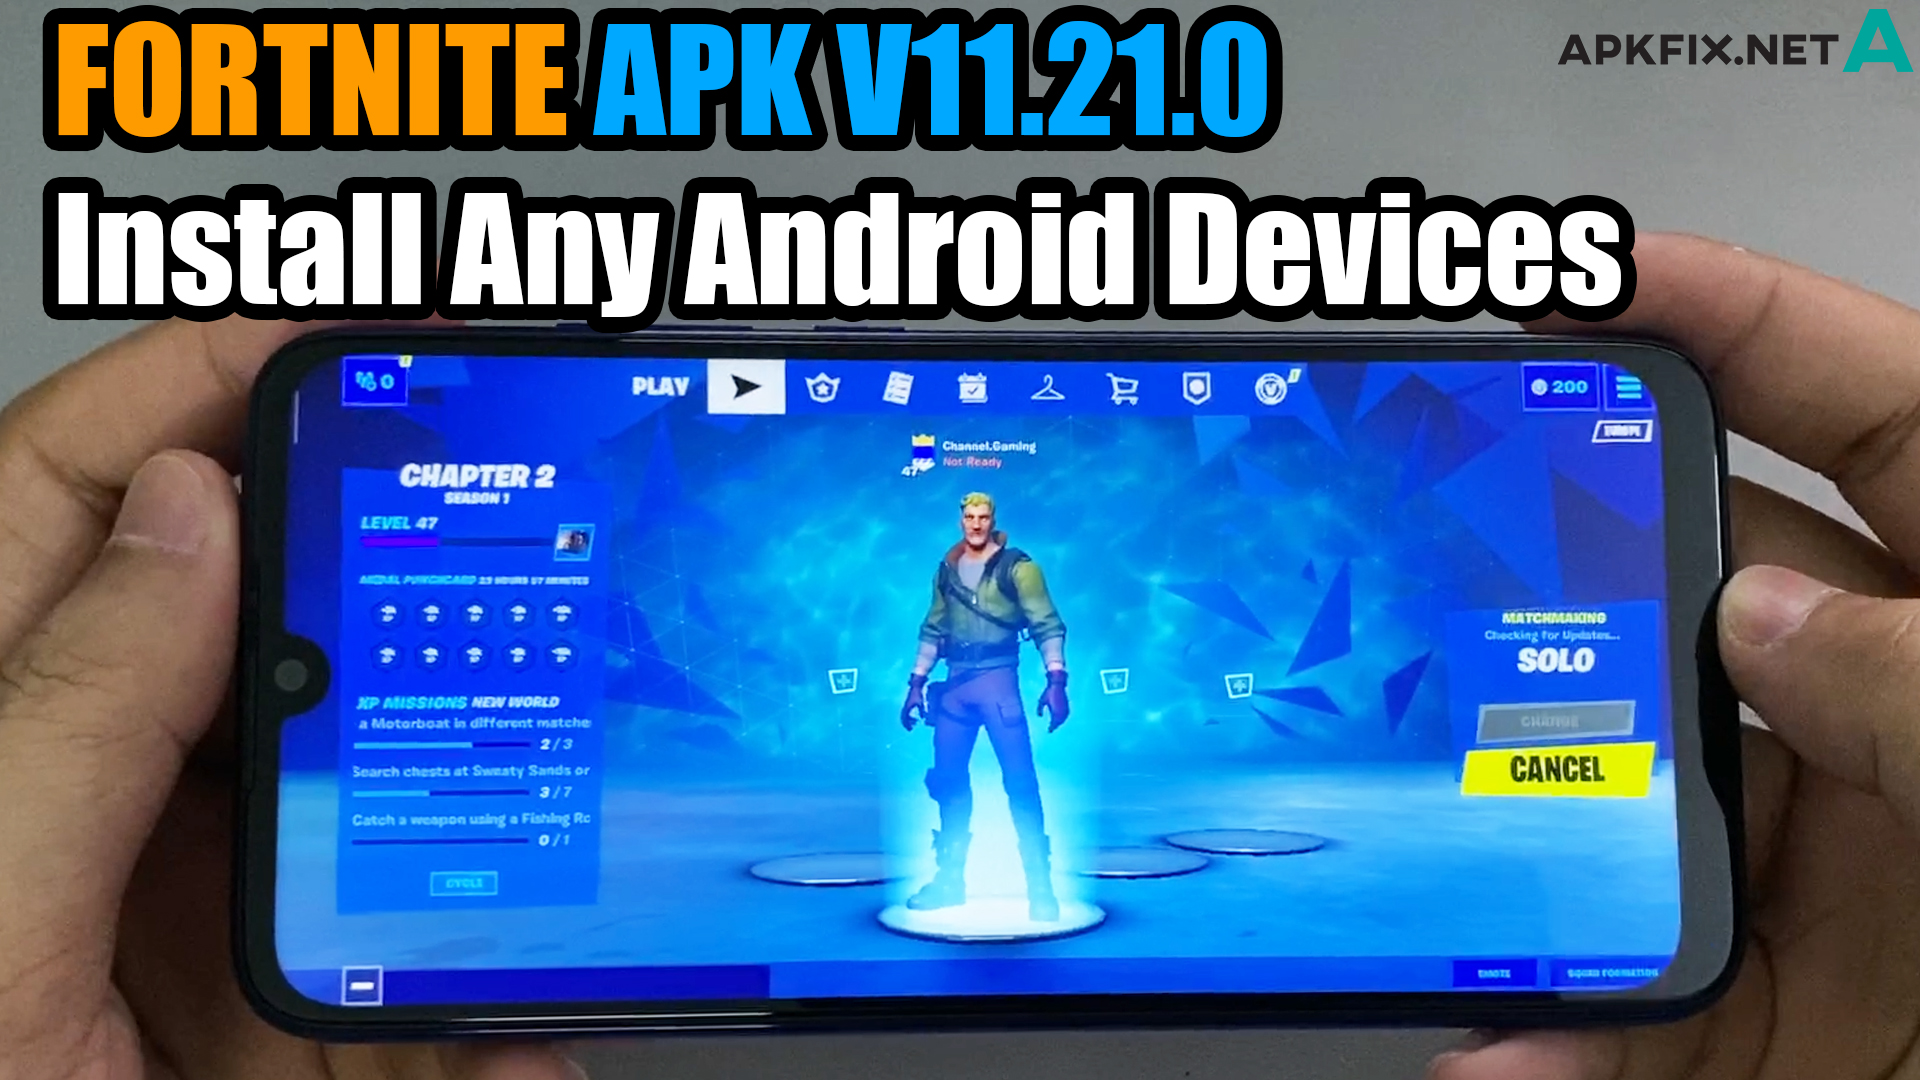 Device Not Supported Fortnite April 2019 Fortnite V11 21 0 Install Any Android Fix Device Not Supported Apk Fix